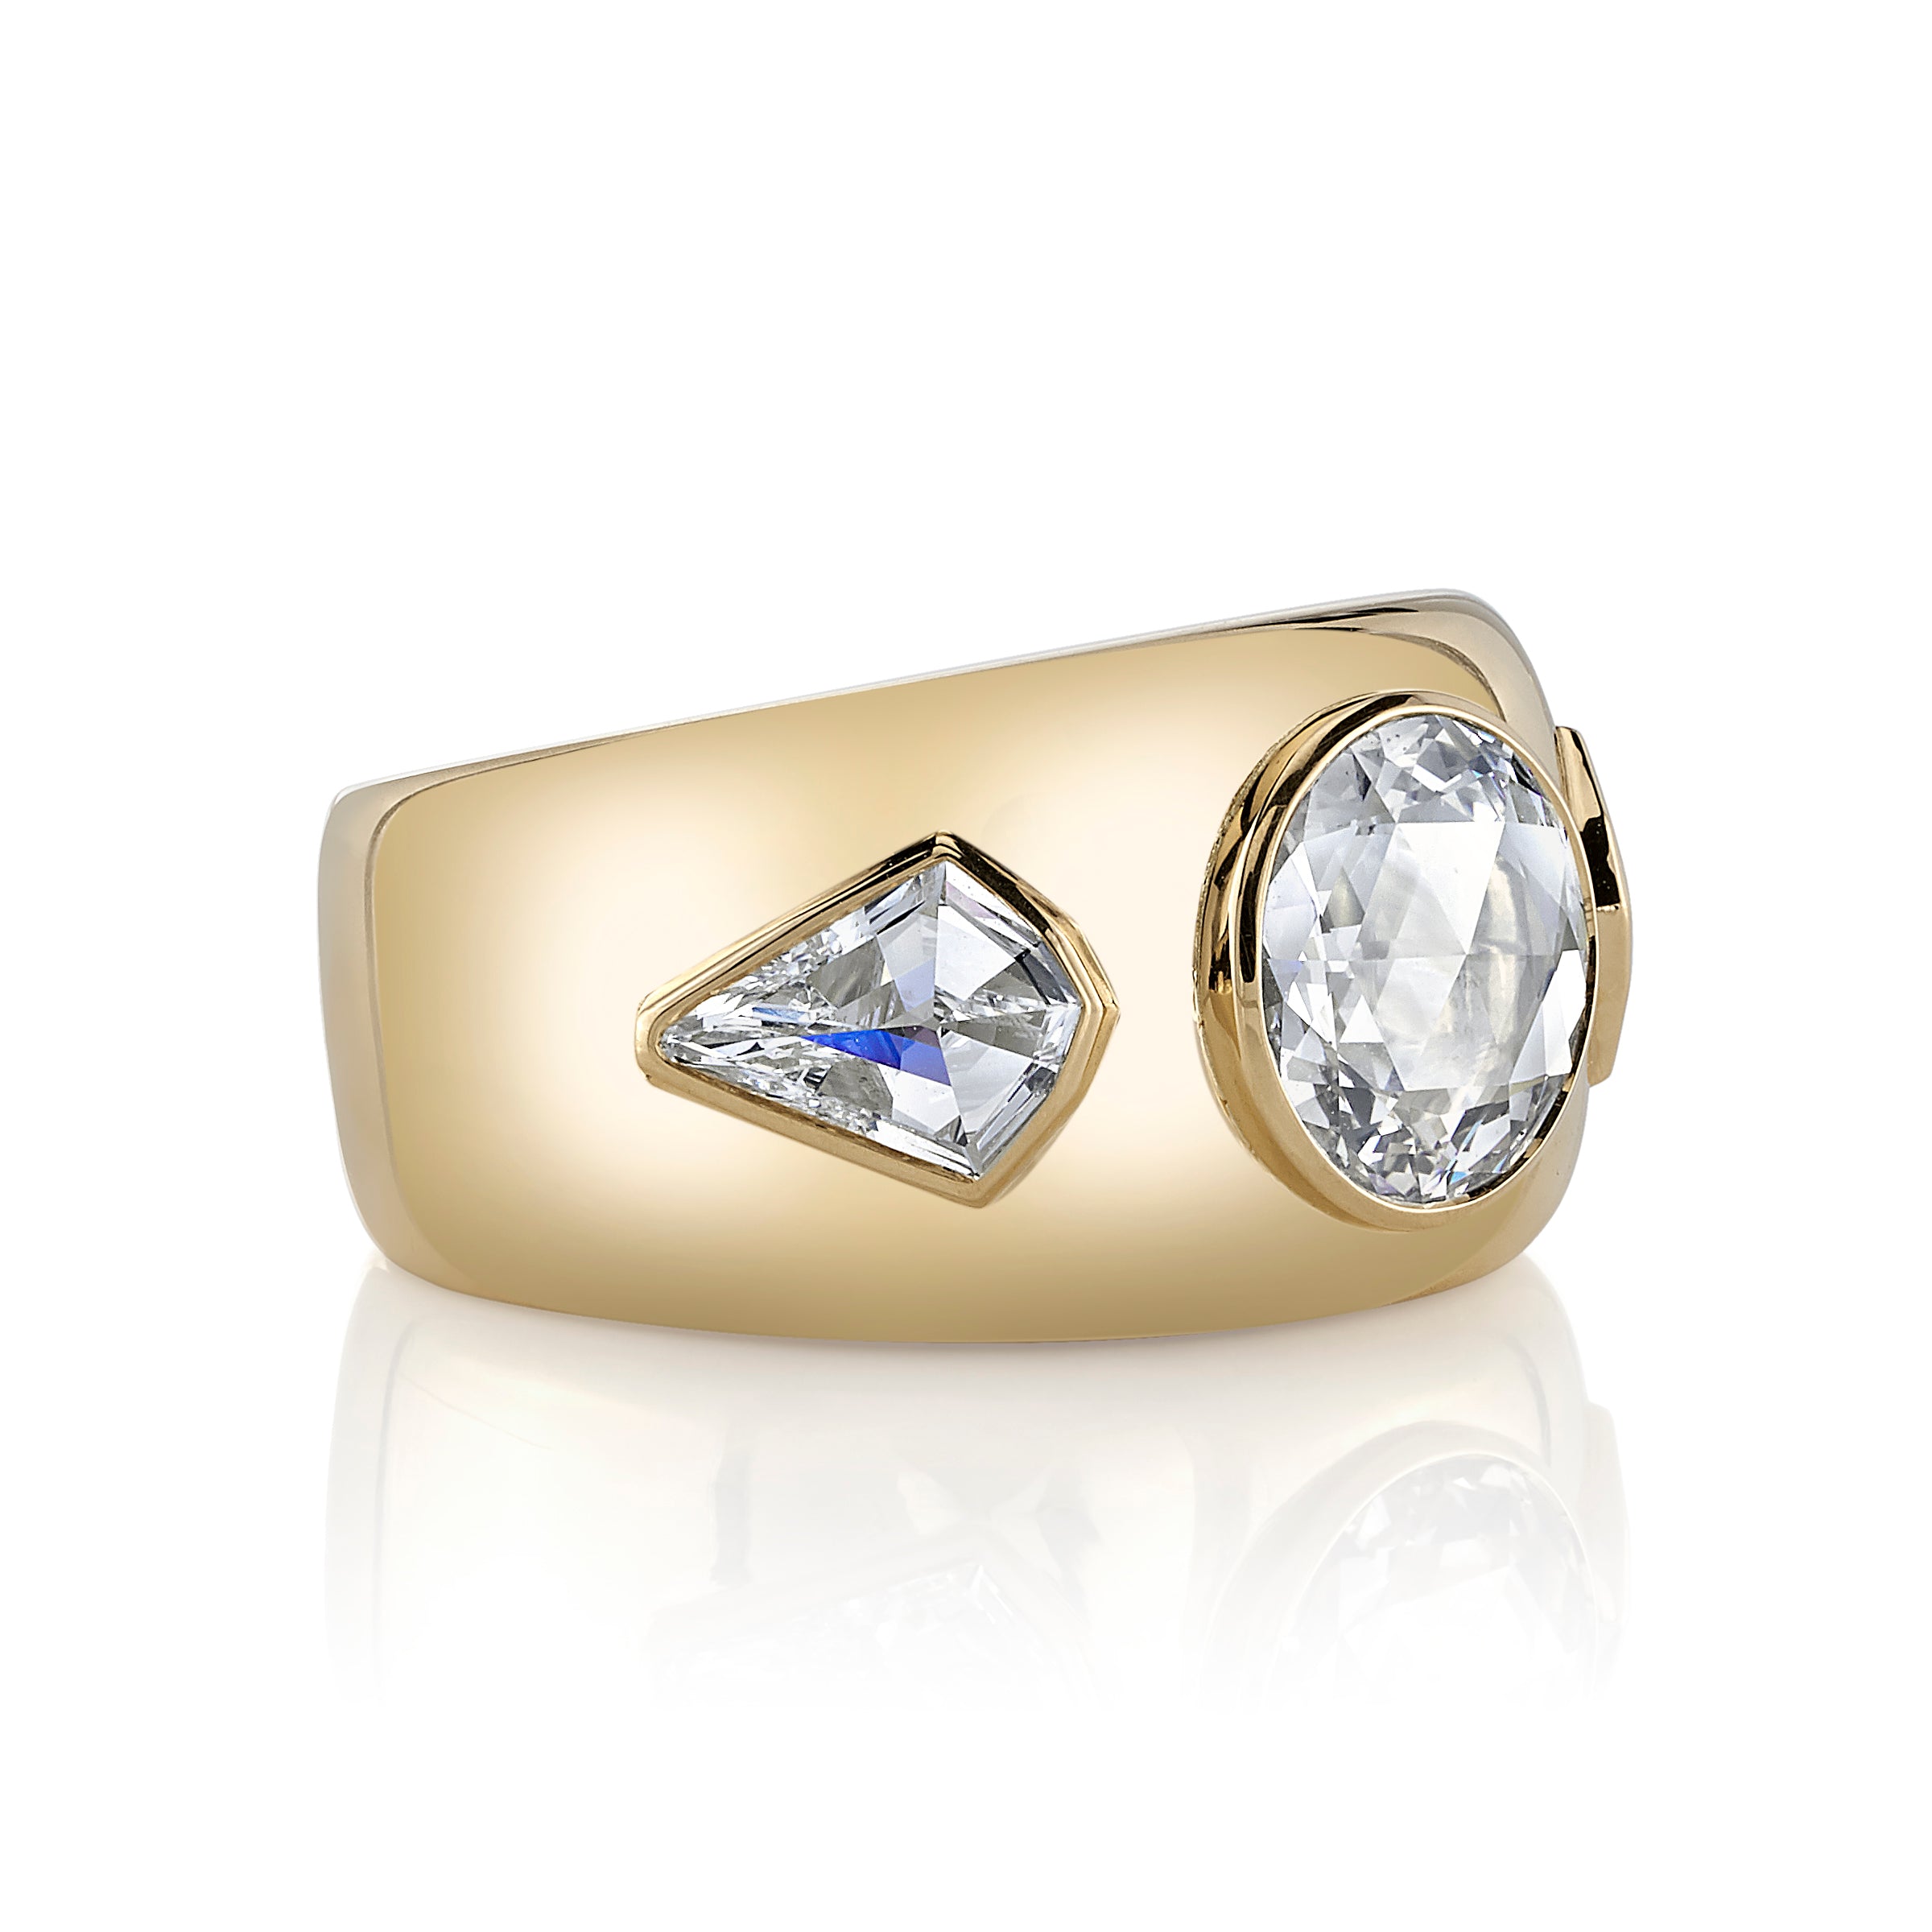 SINGLE STONE WINSLOW RING featuring 1.34ct M/VS1 GIA certified rose cut diamond with 0.70ctw kite cut accent diamonds set in a handcrafted 18K yellow gold mounting.